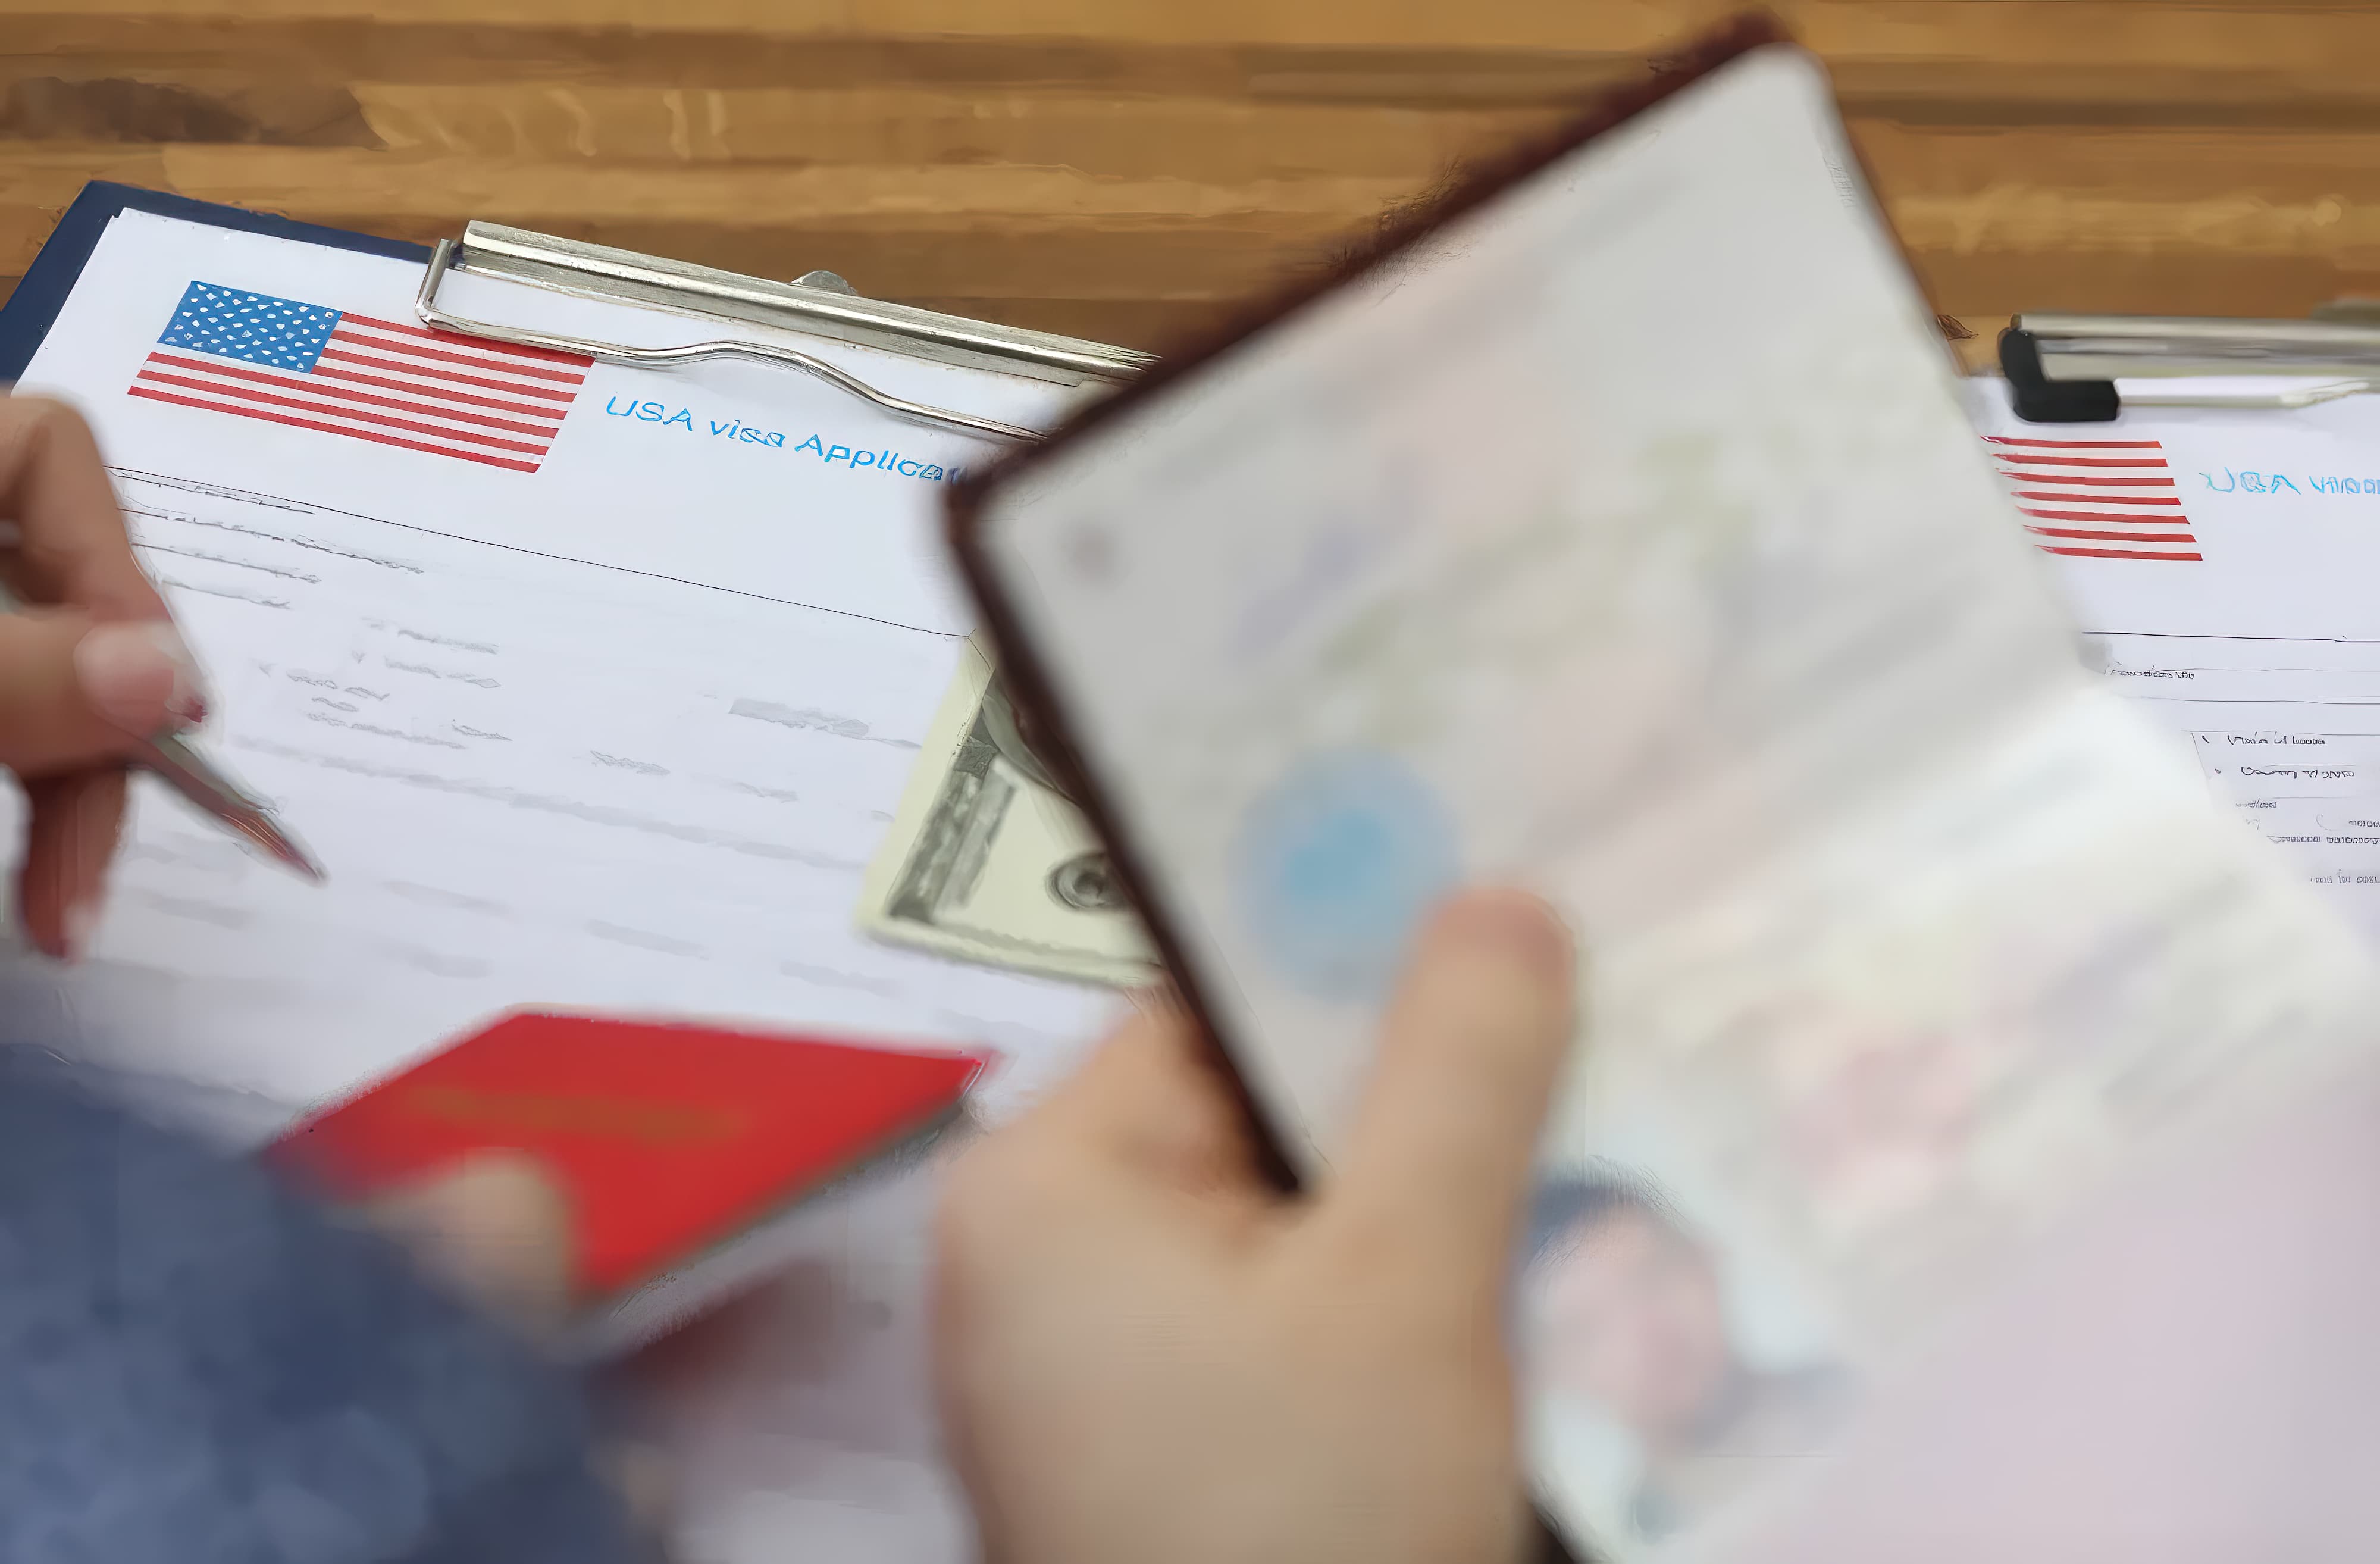 A person is filling out a USA Visa Application form while holding a passport